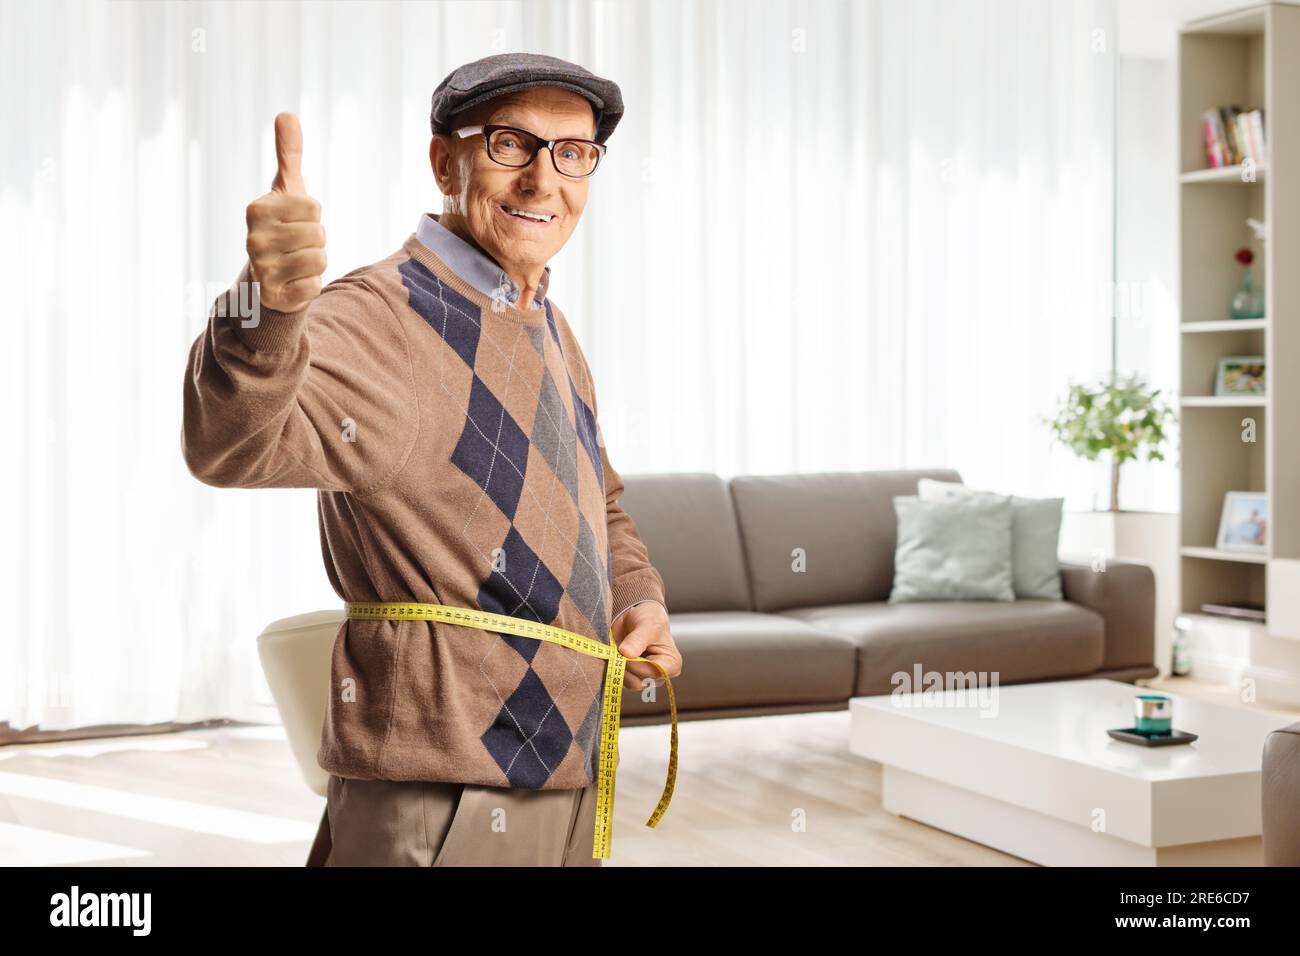 Elderly man measuring waist with a tape inside a living room and gesturing thumbs up Stock Photo